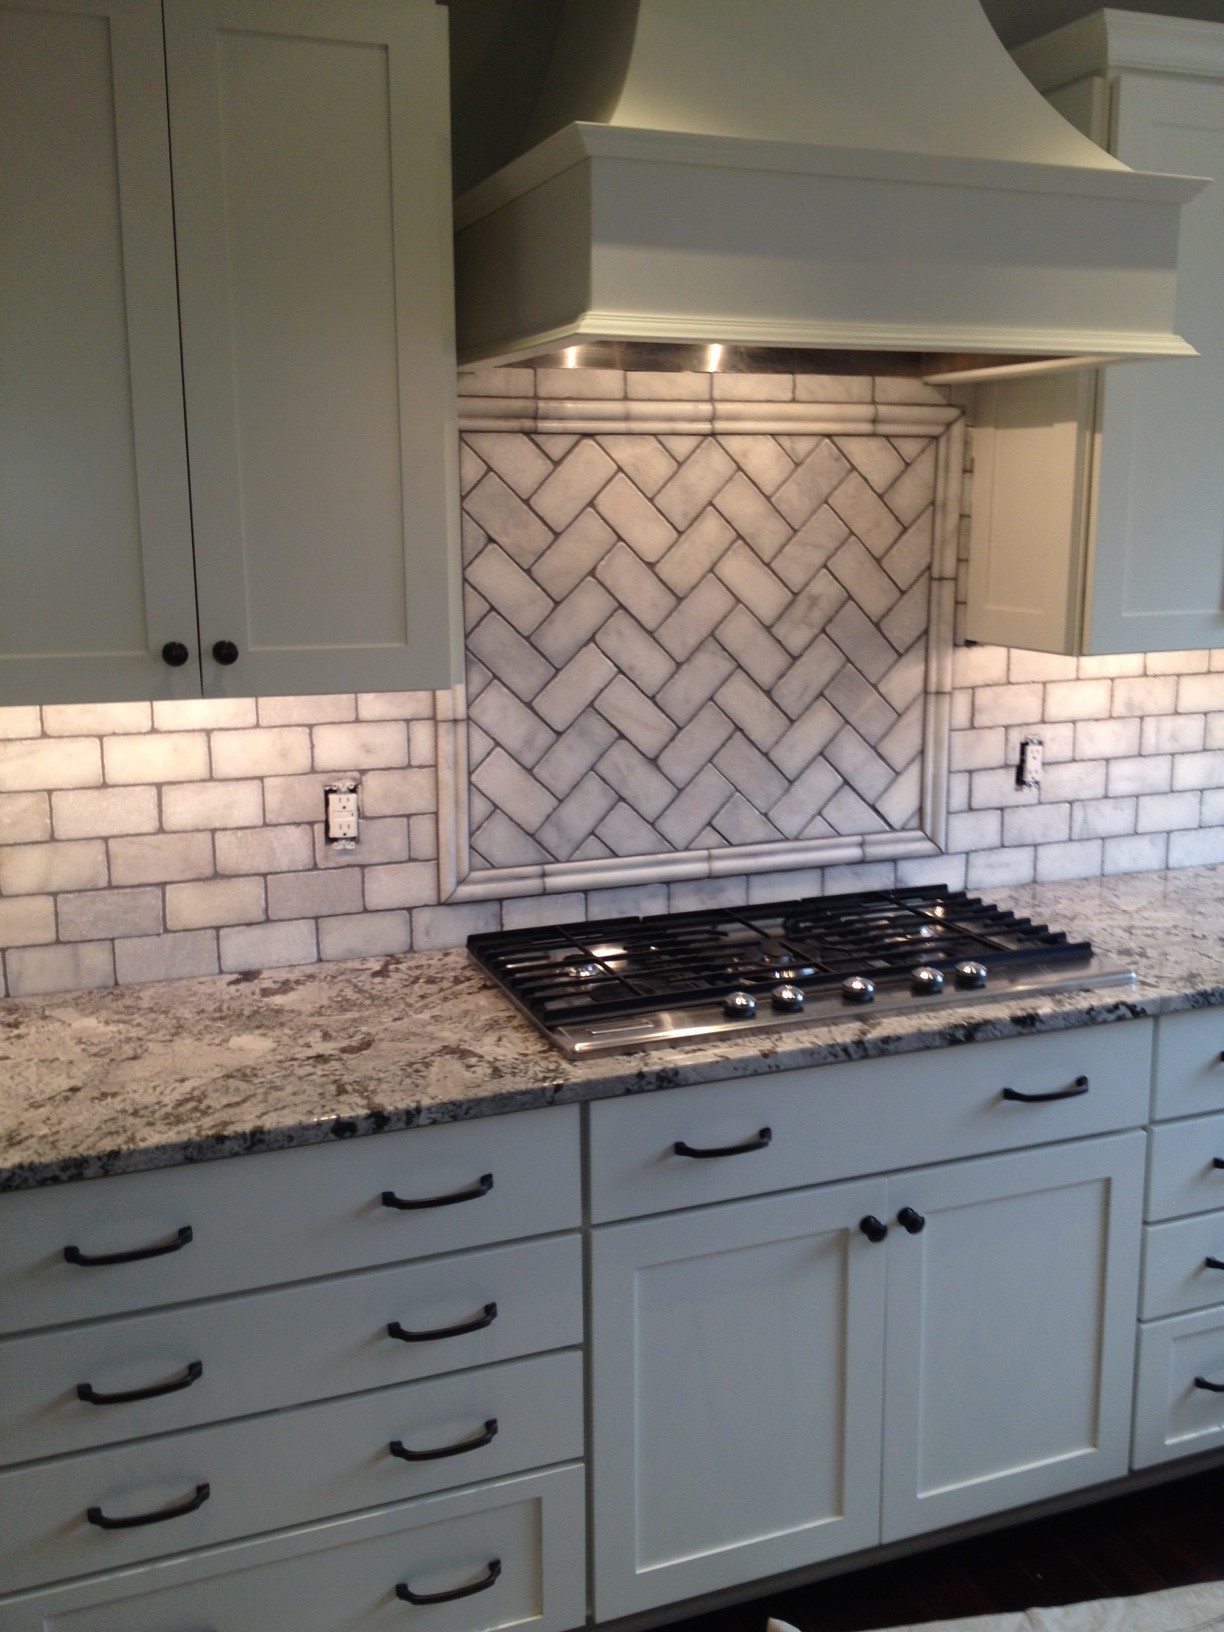  A backsplash was added to this new kitchen 